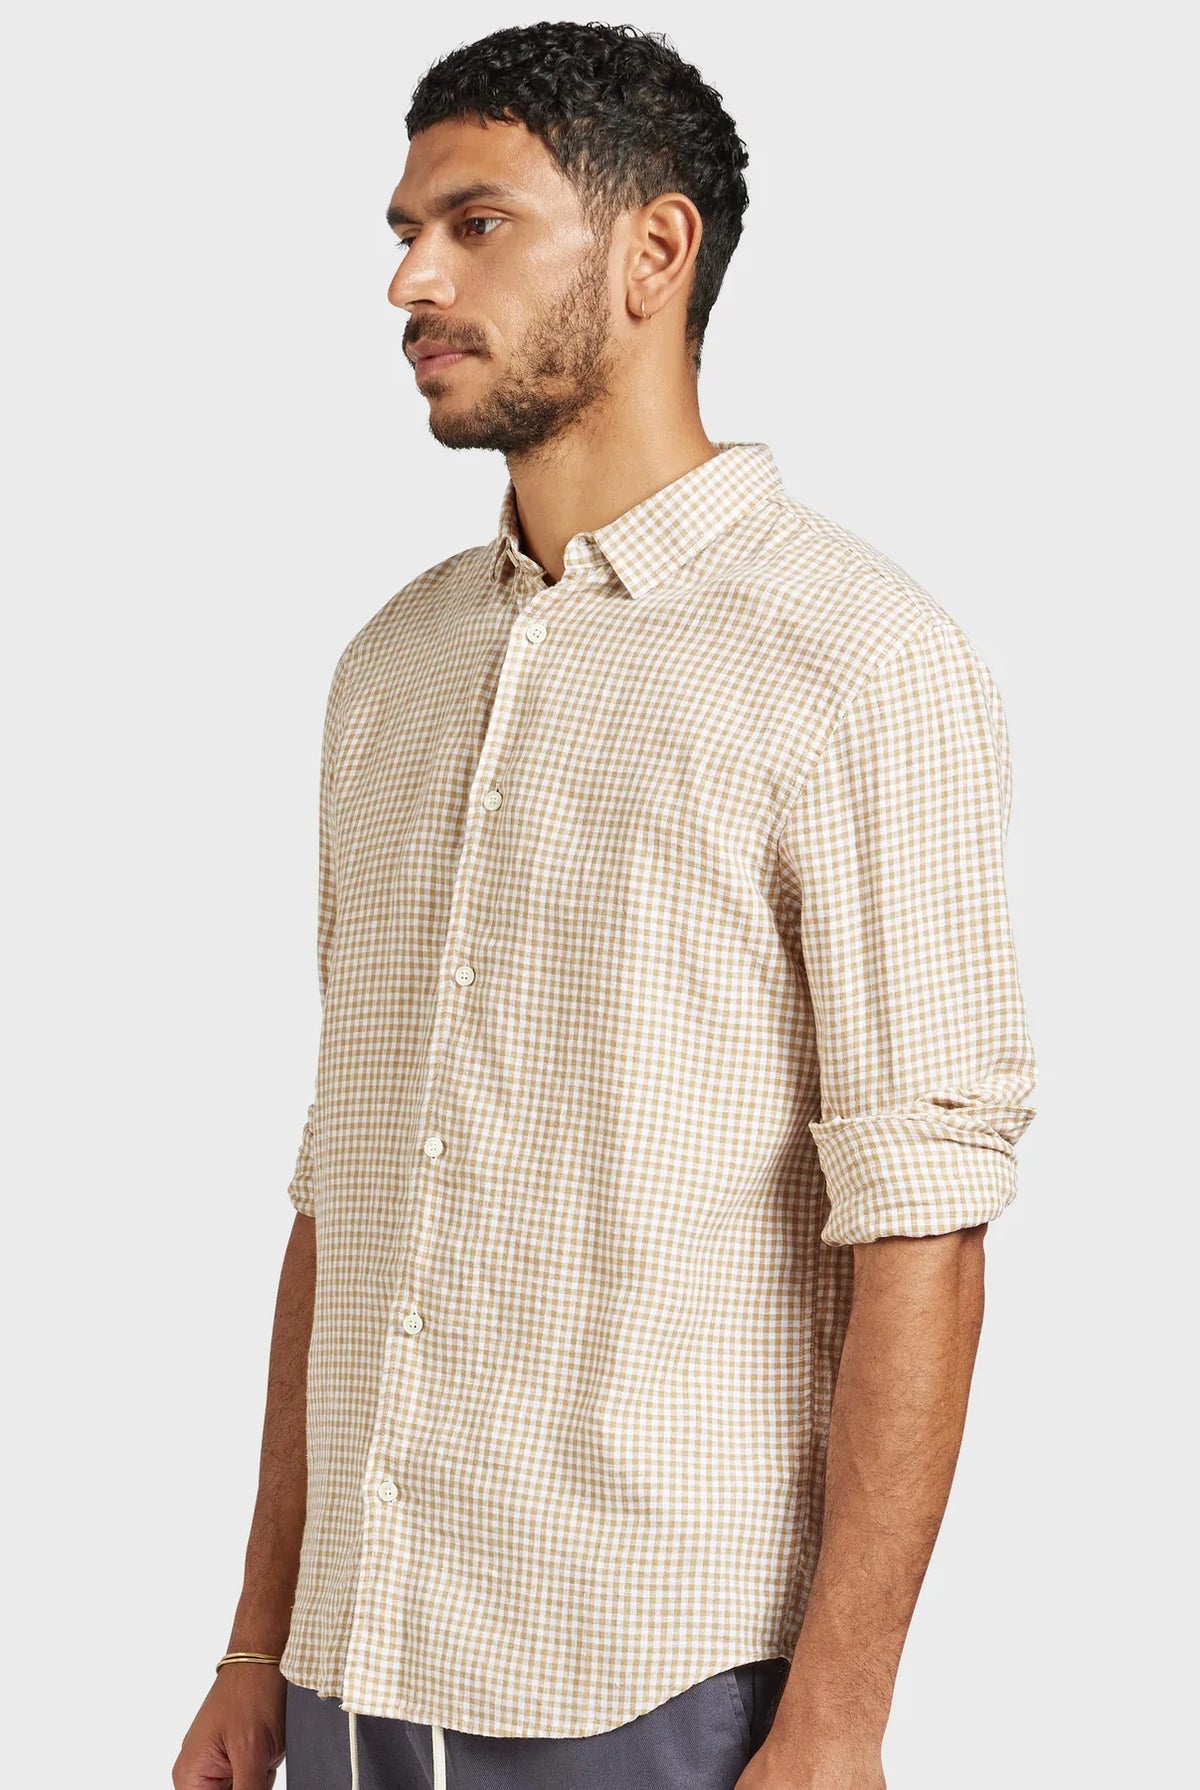 Academy Brand - Bobby LS Shirt Parchment Check